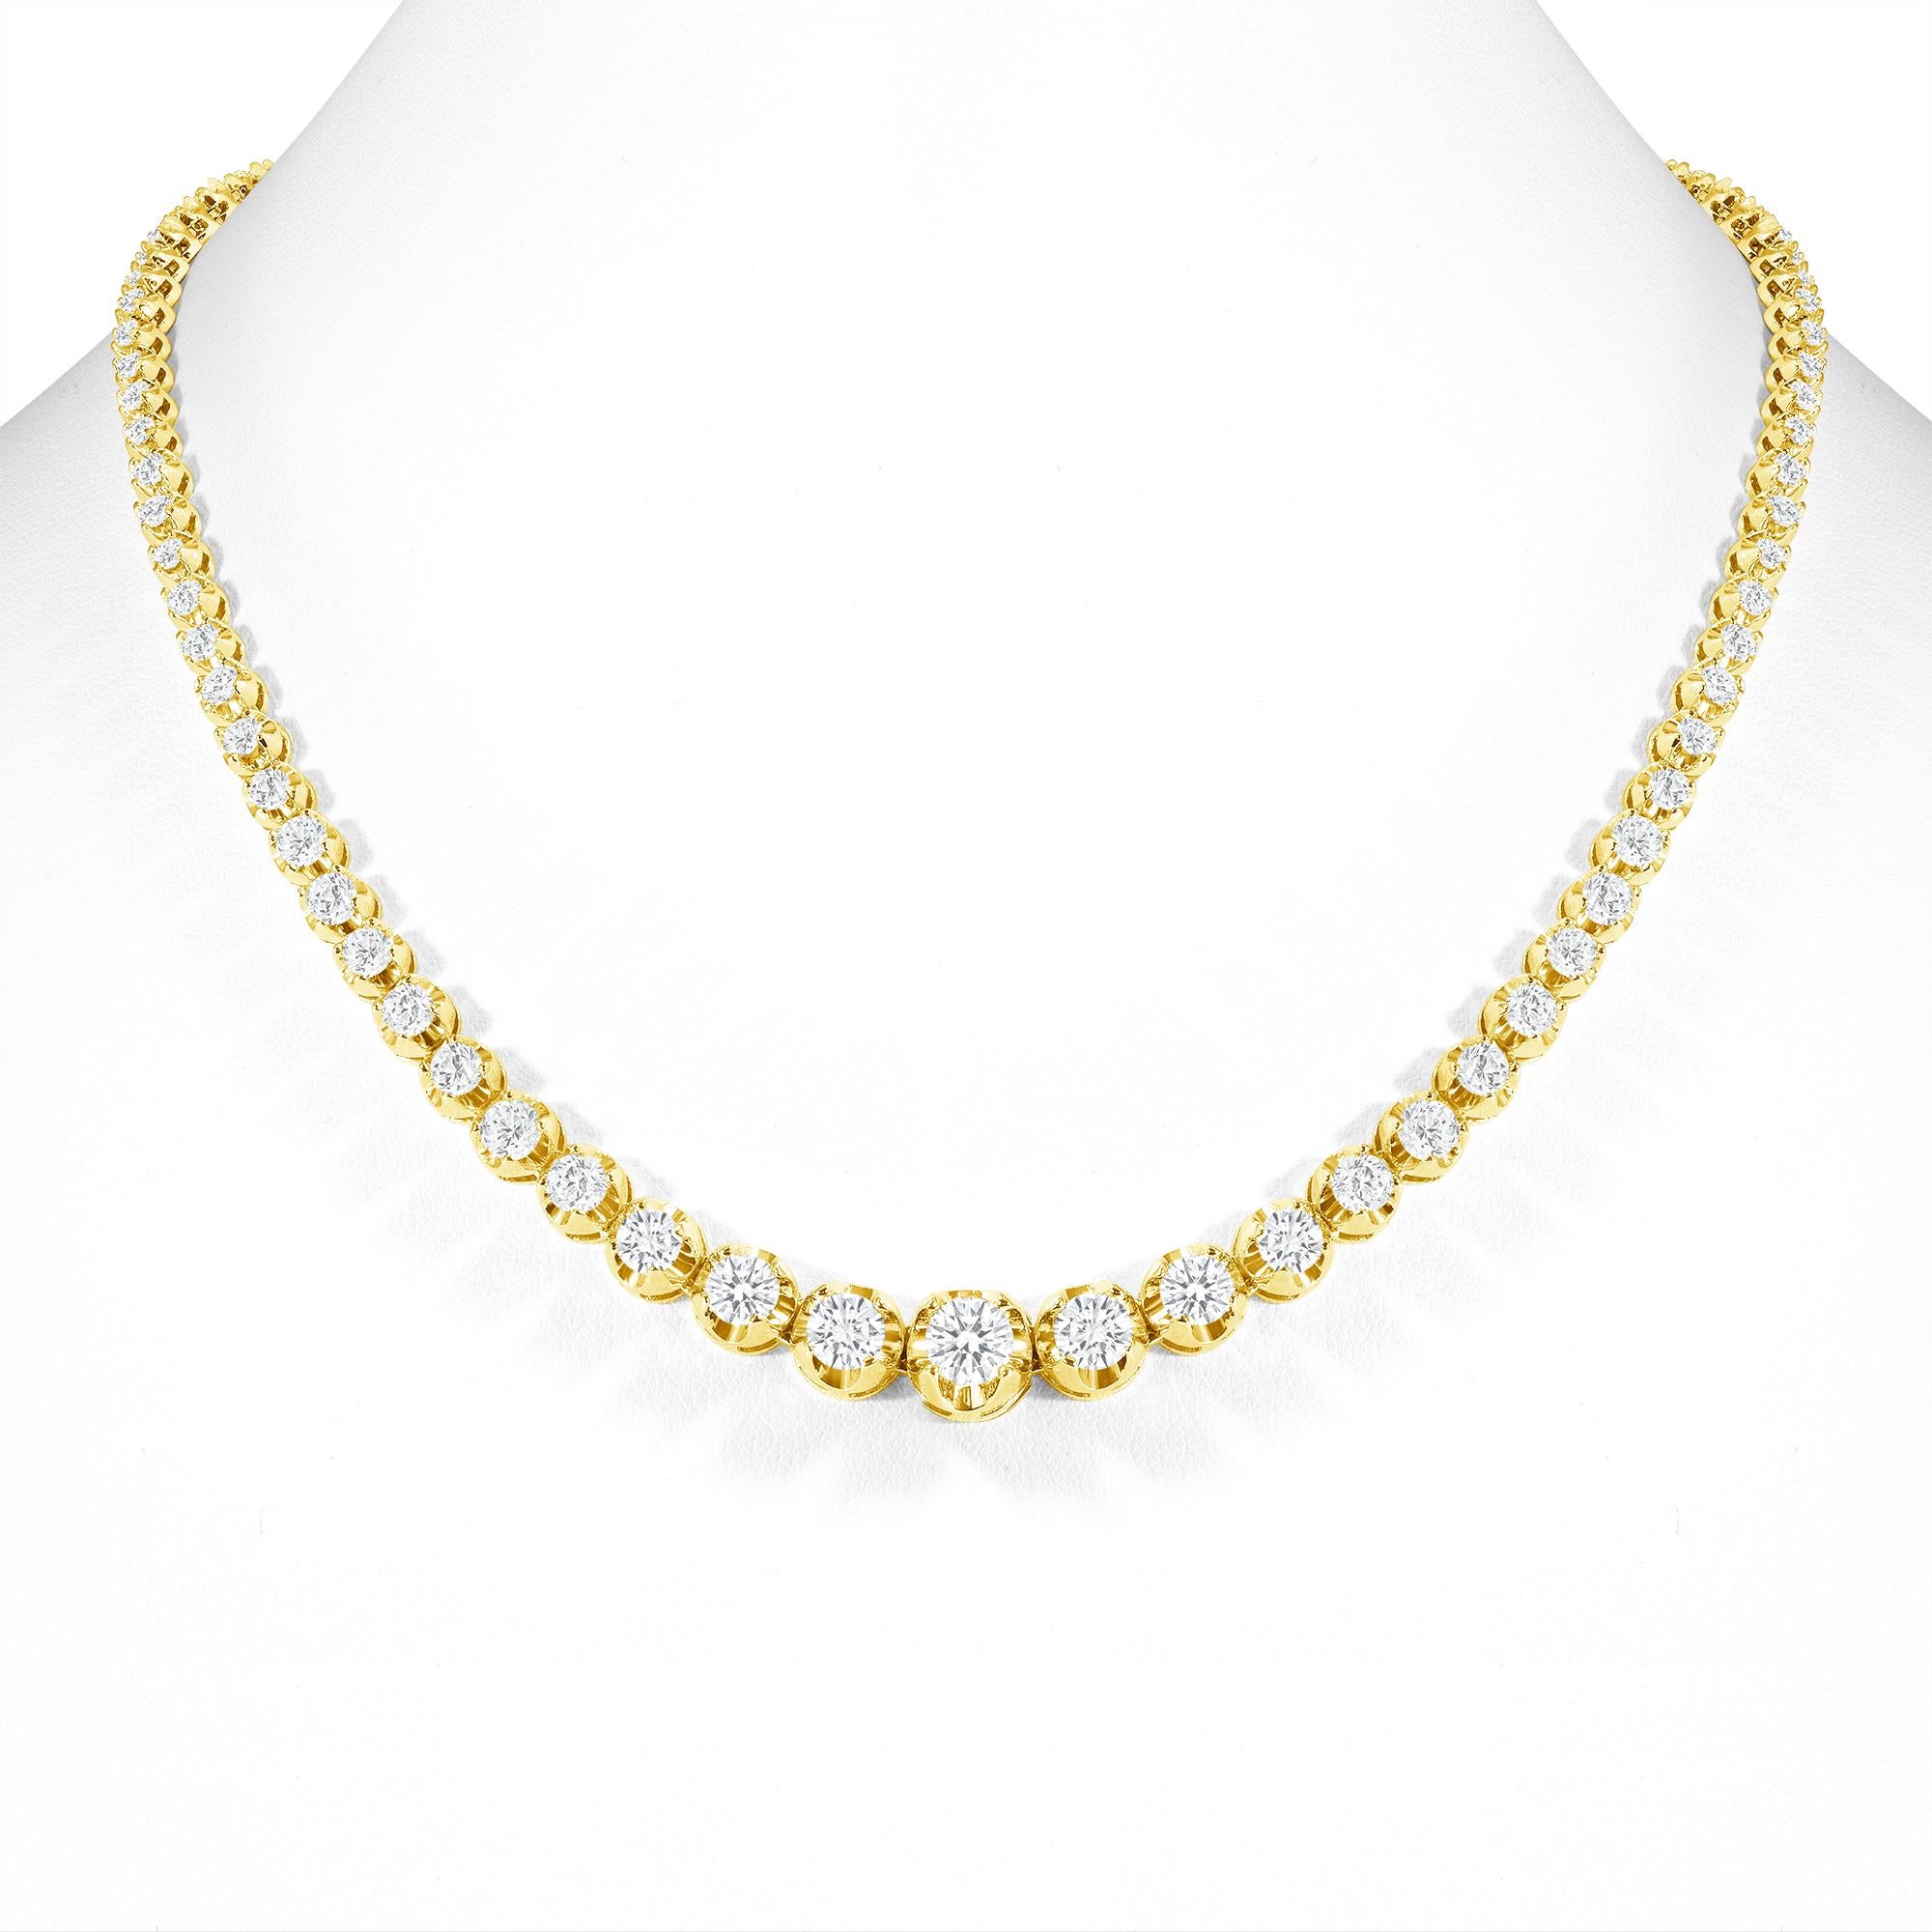 This finely made graduated necklace with beautiful round diamonds sits elegantly on any neck. 

Metal: 14k Gold
Diamond Cut: Round
Total Diamond Approx. Carats:  5ct
Diamond Clarity: VS
Diamond Color: F-G
Size: 20 inches
Color: Yellow Gold
Included